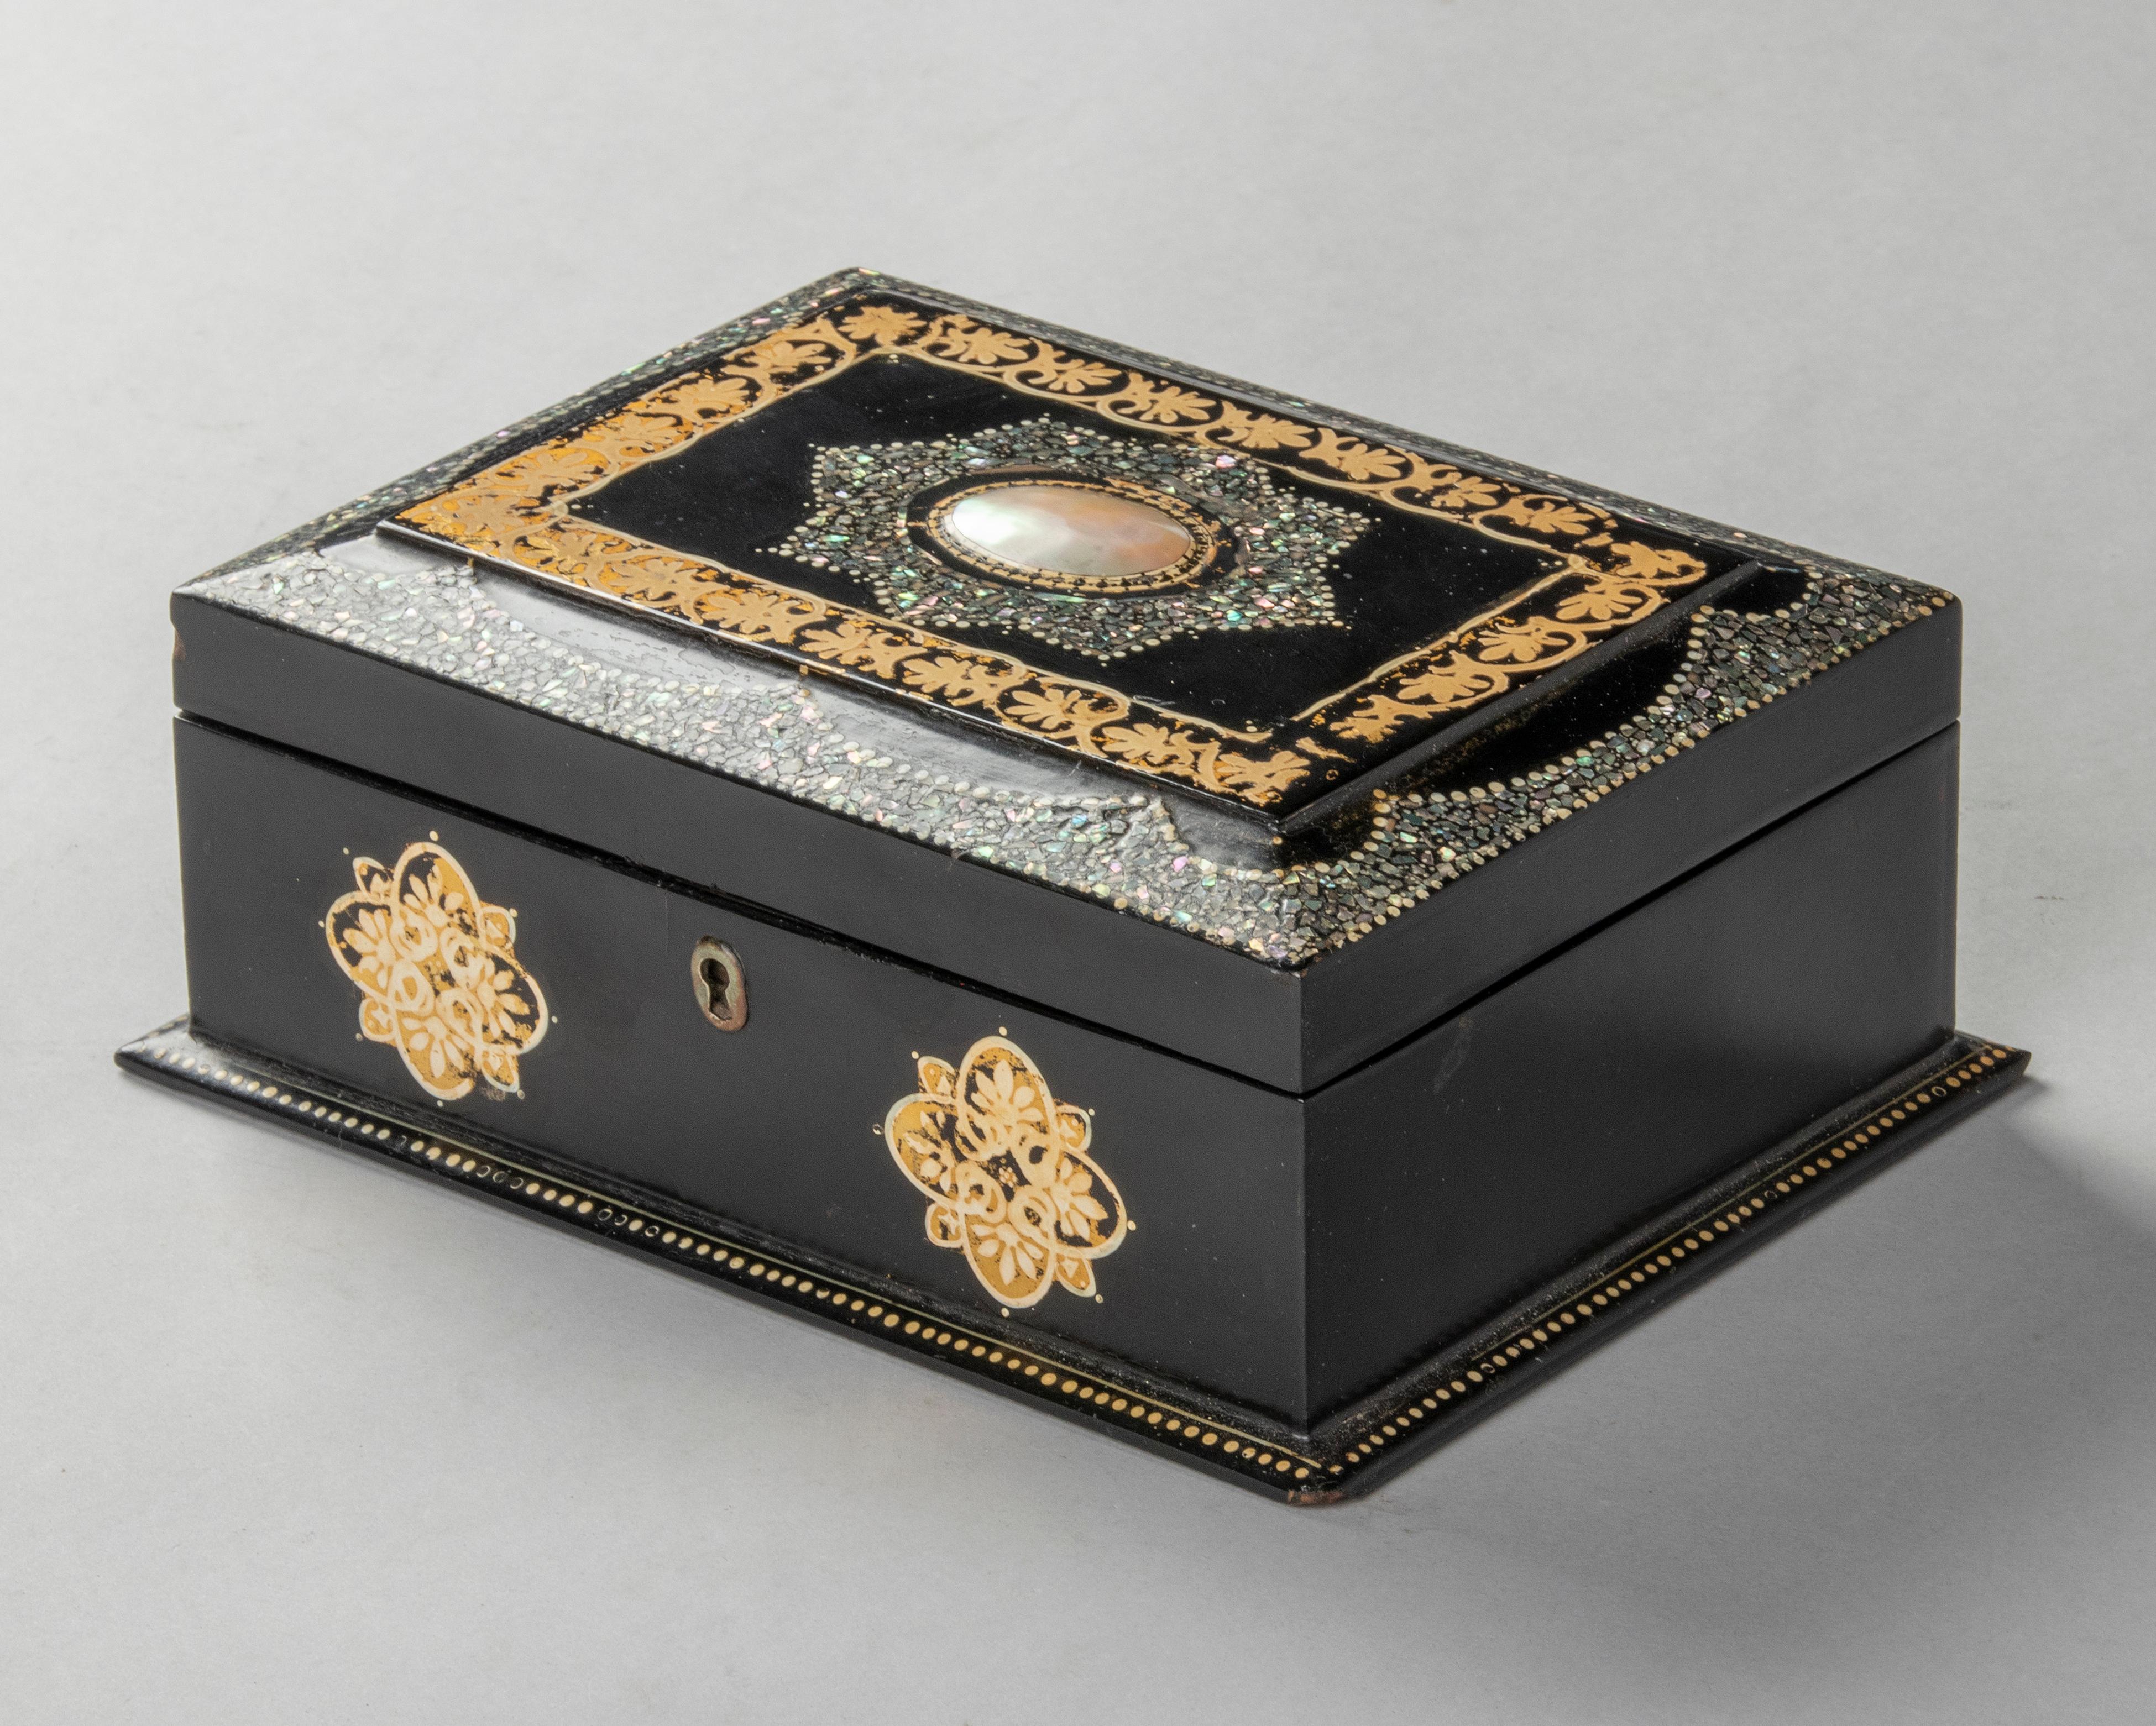 Beautiful antique Victorian jewelery box. The box is made of wood, covered with paper machee, lacquered black and inlaid with a mosaic of mother-of-pearl. Painted with gold colored decorations. The interior of the box is lined with blue silk fabric.